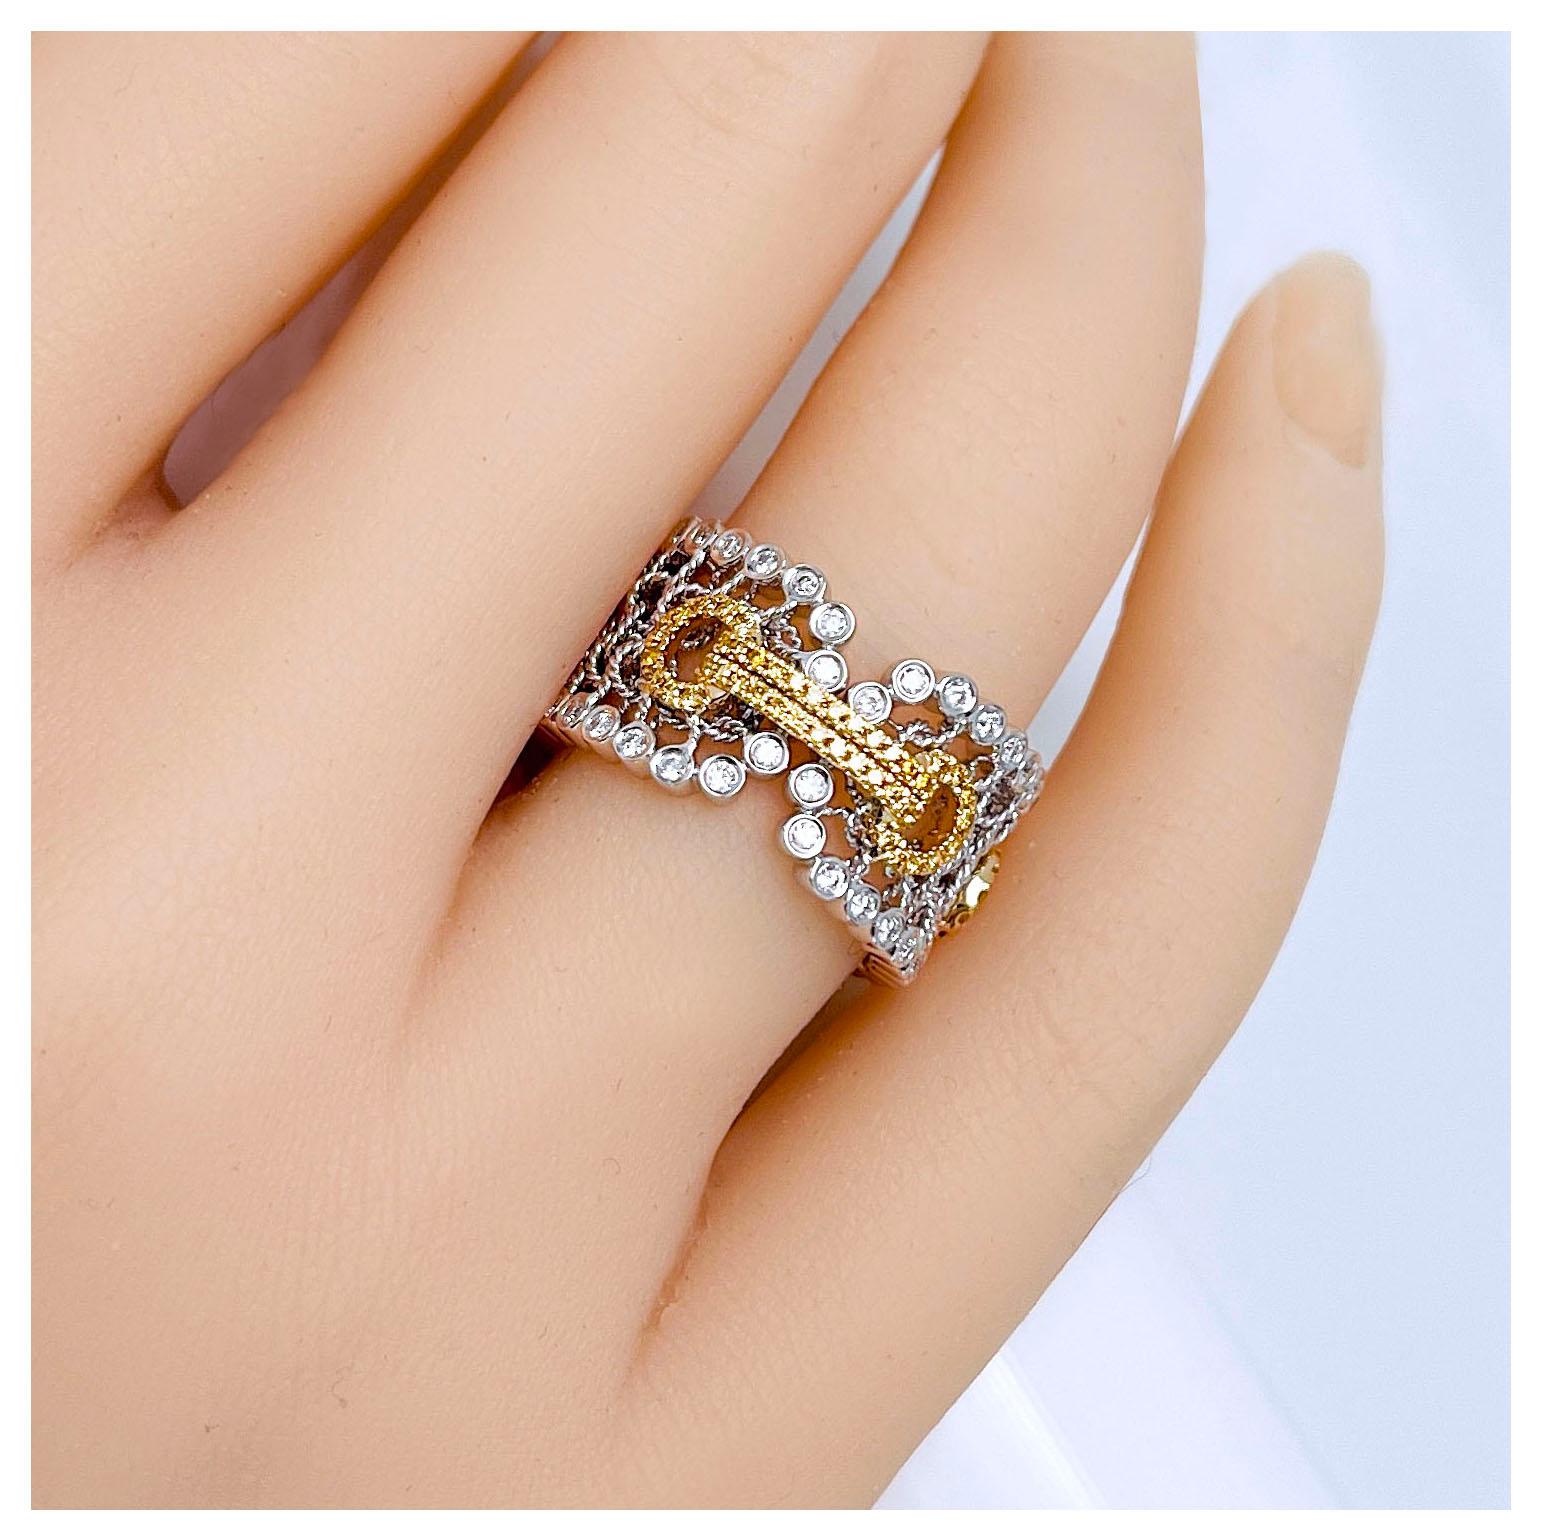 Vitolo 18 Karat Gold Handmade Gold Links Ring with White and Yellow Diamonds For Sale 7